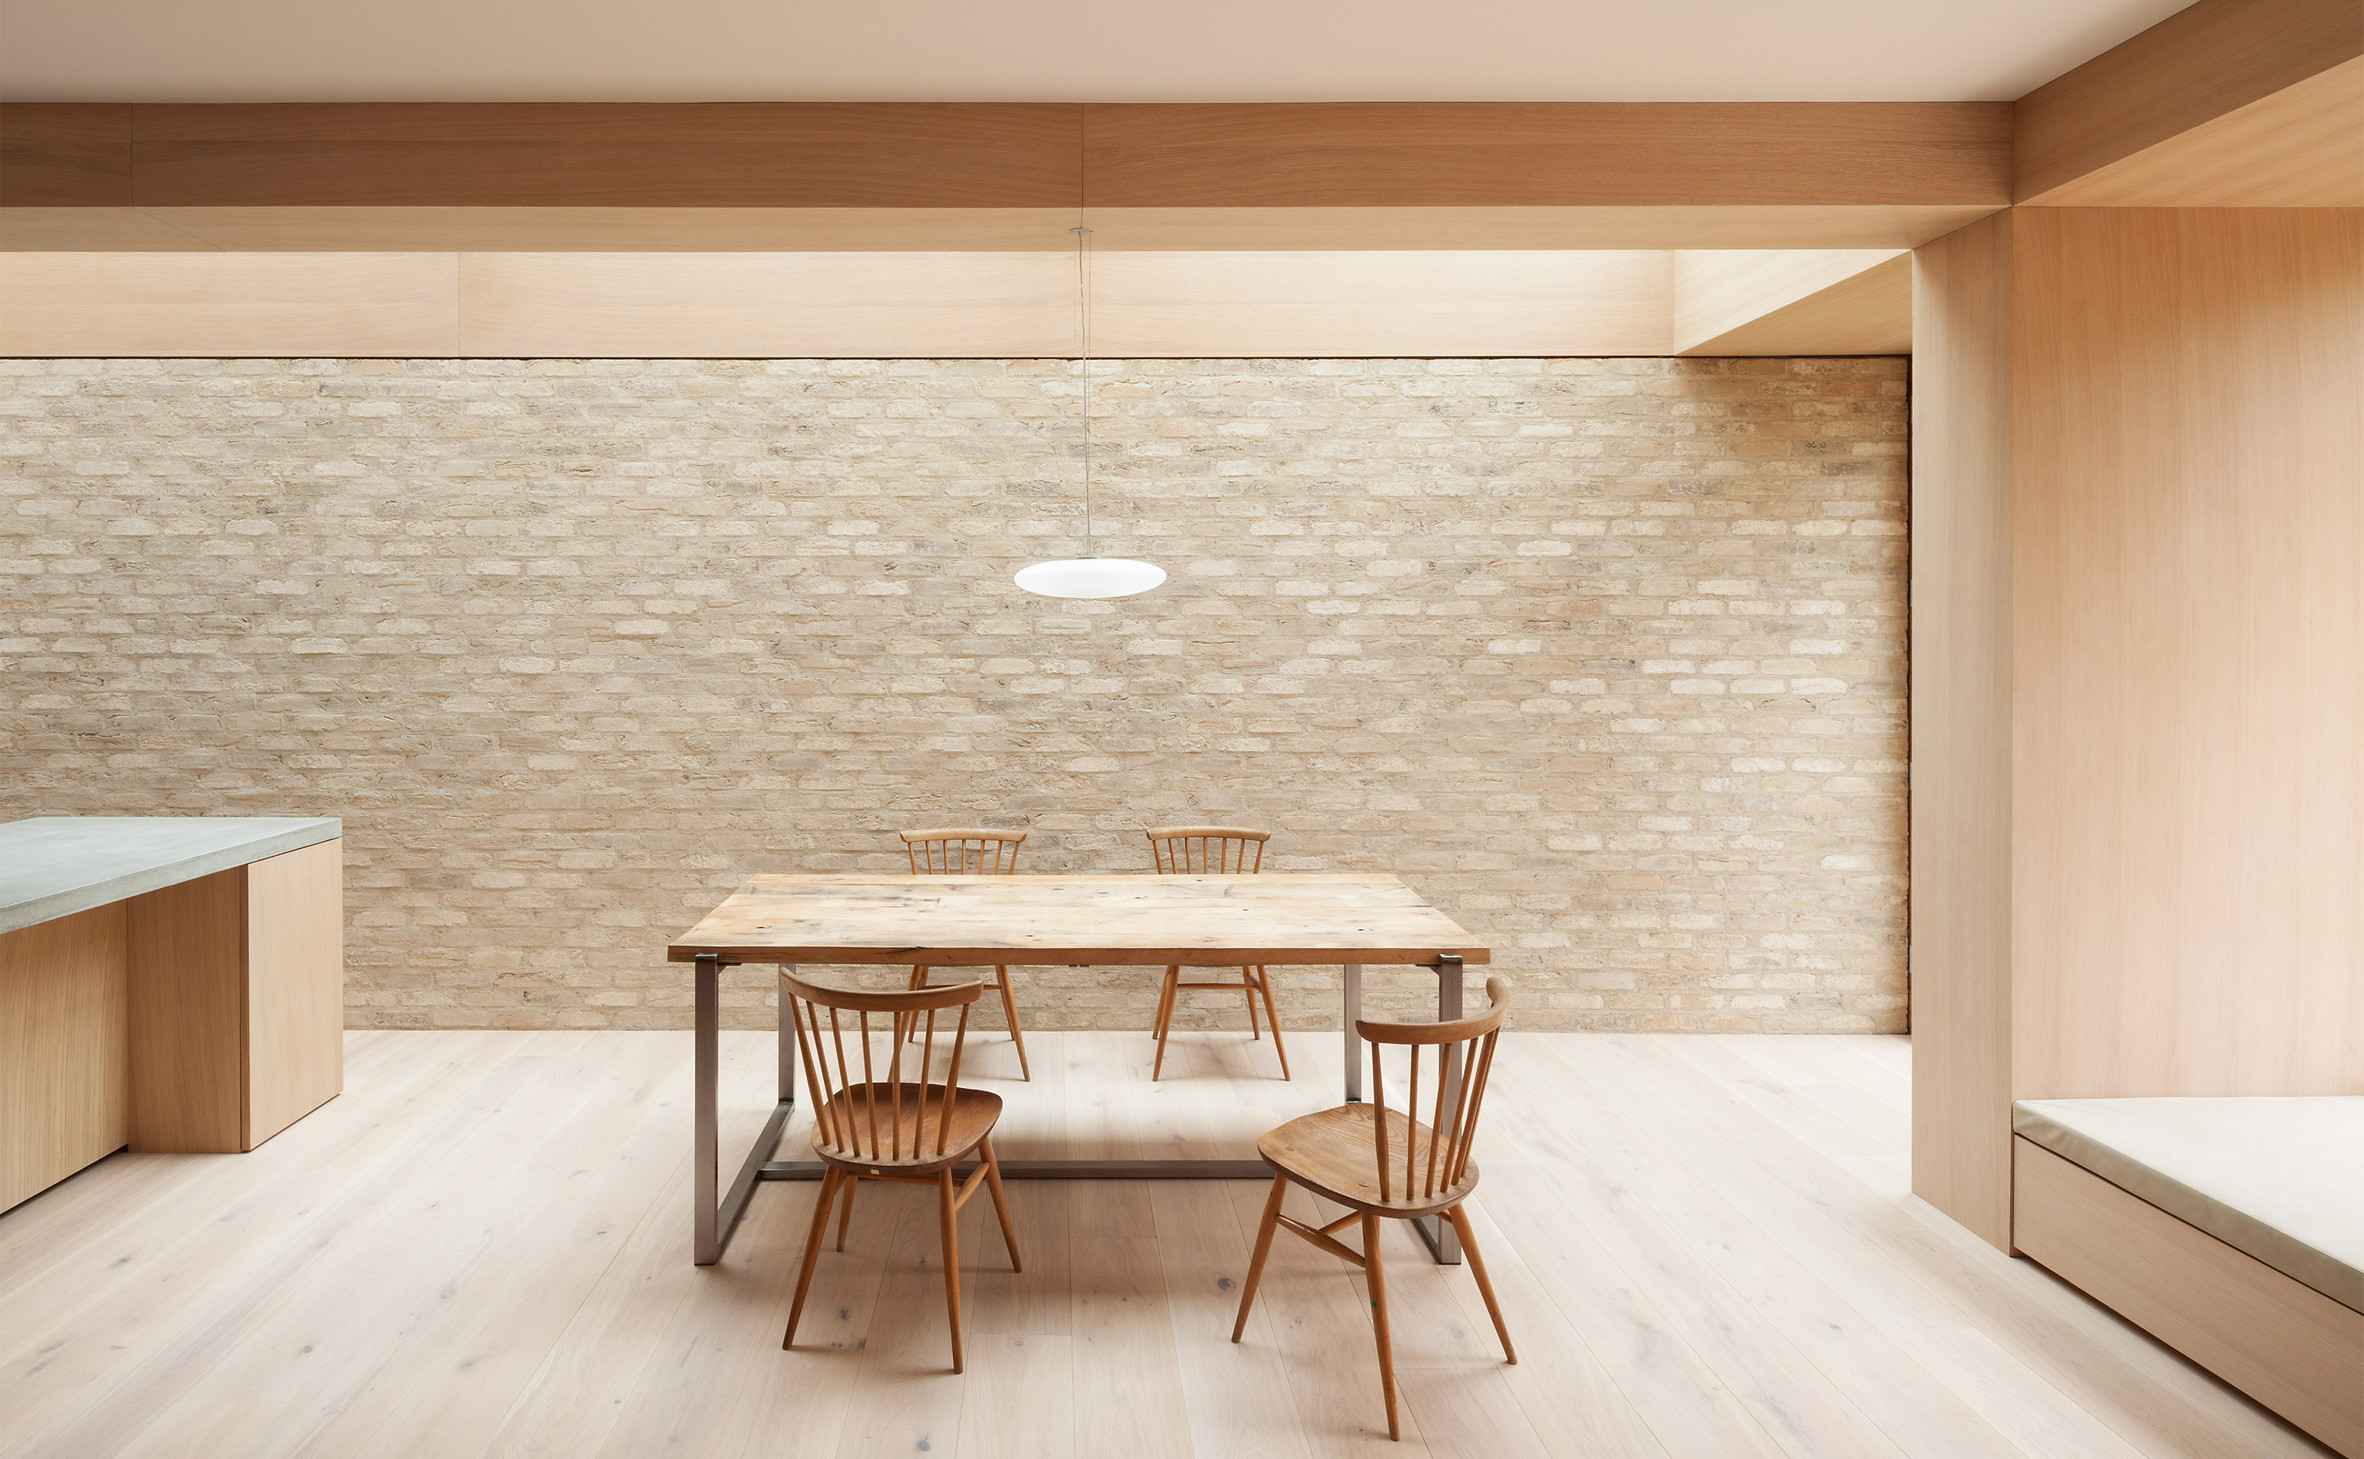 harvey-road-crouch-end-london-erbar-mattes-residential-architecture-extension_dezeen_2364_col_2